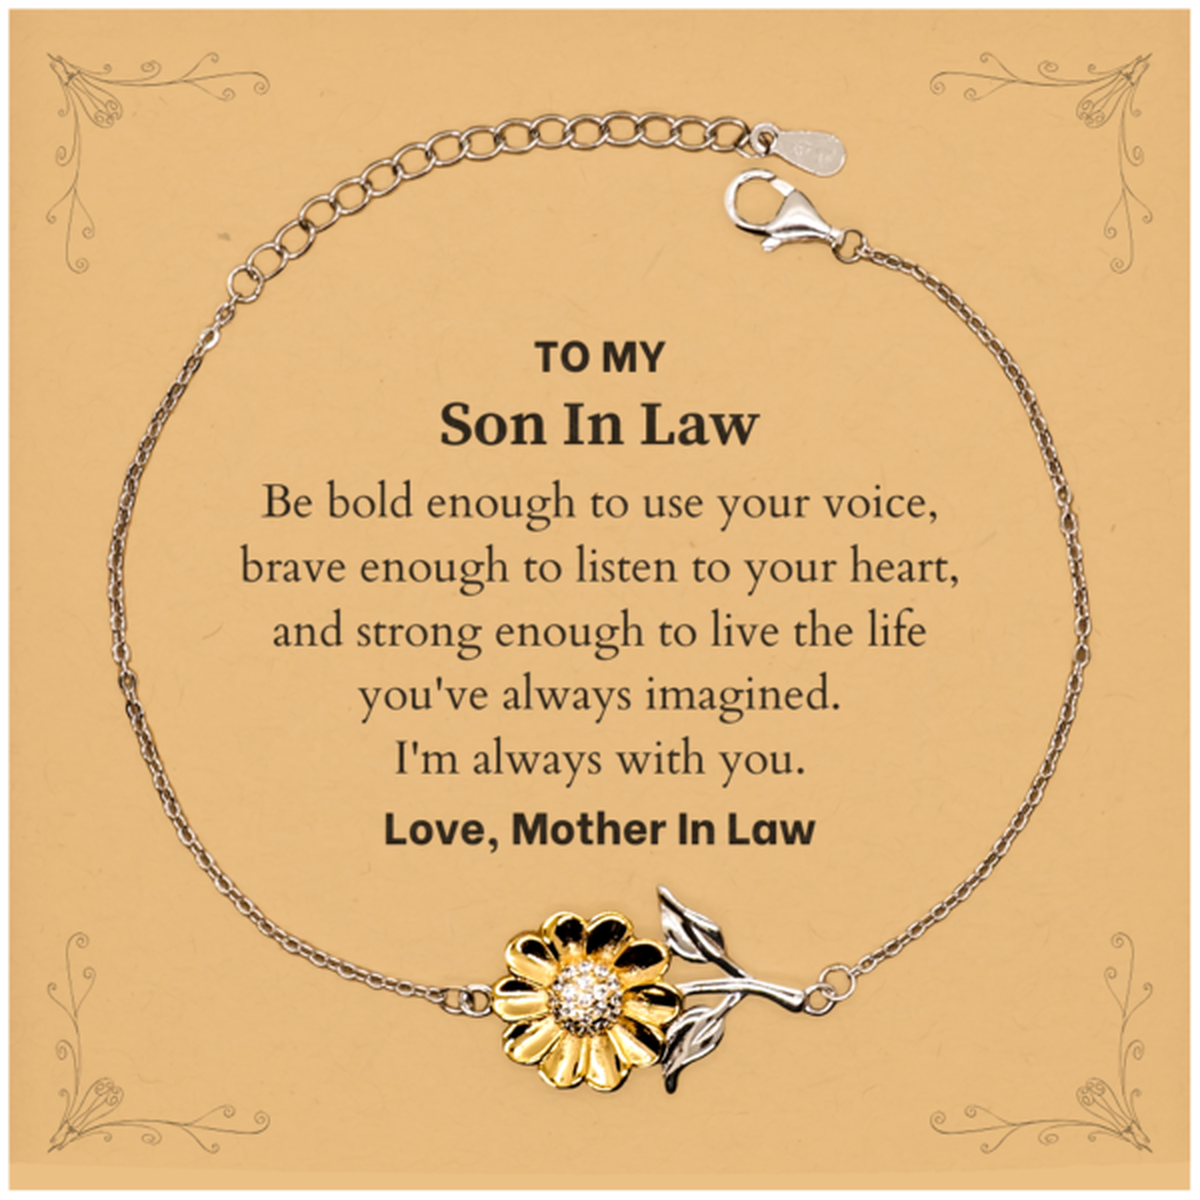 Keepsake Son In Law Sunflower Bracelet Gift Idea Graduation Christmas Birthday Son In Law from Mother In Law, Son In Law Be bold enough to use your voice, brave enough to listen to your heart. Love, Mother In Law